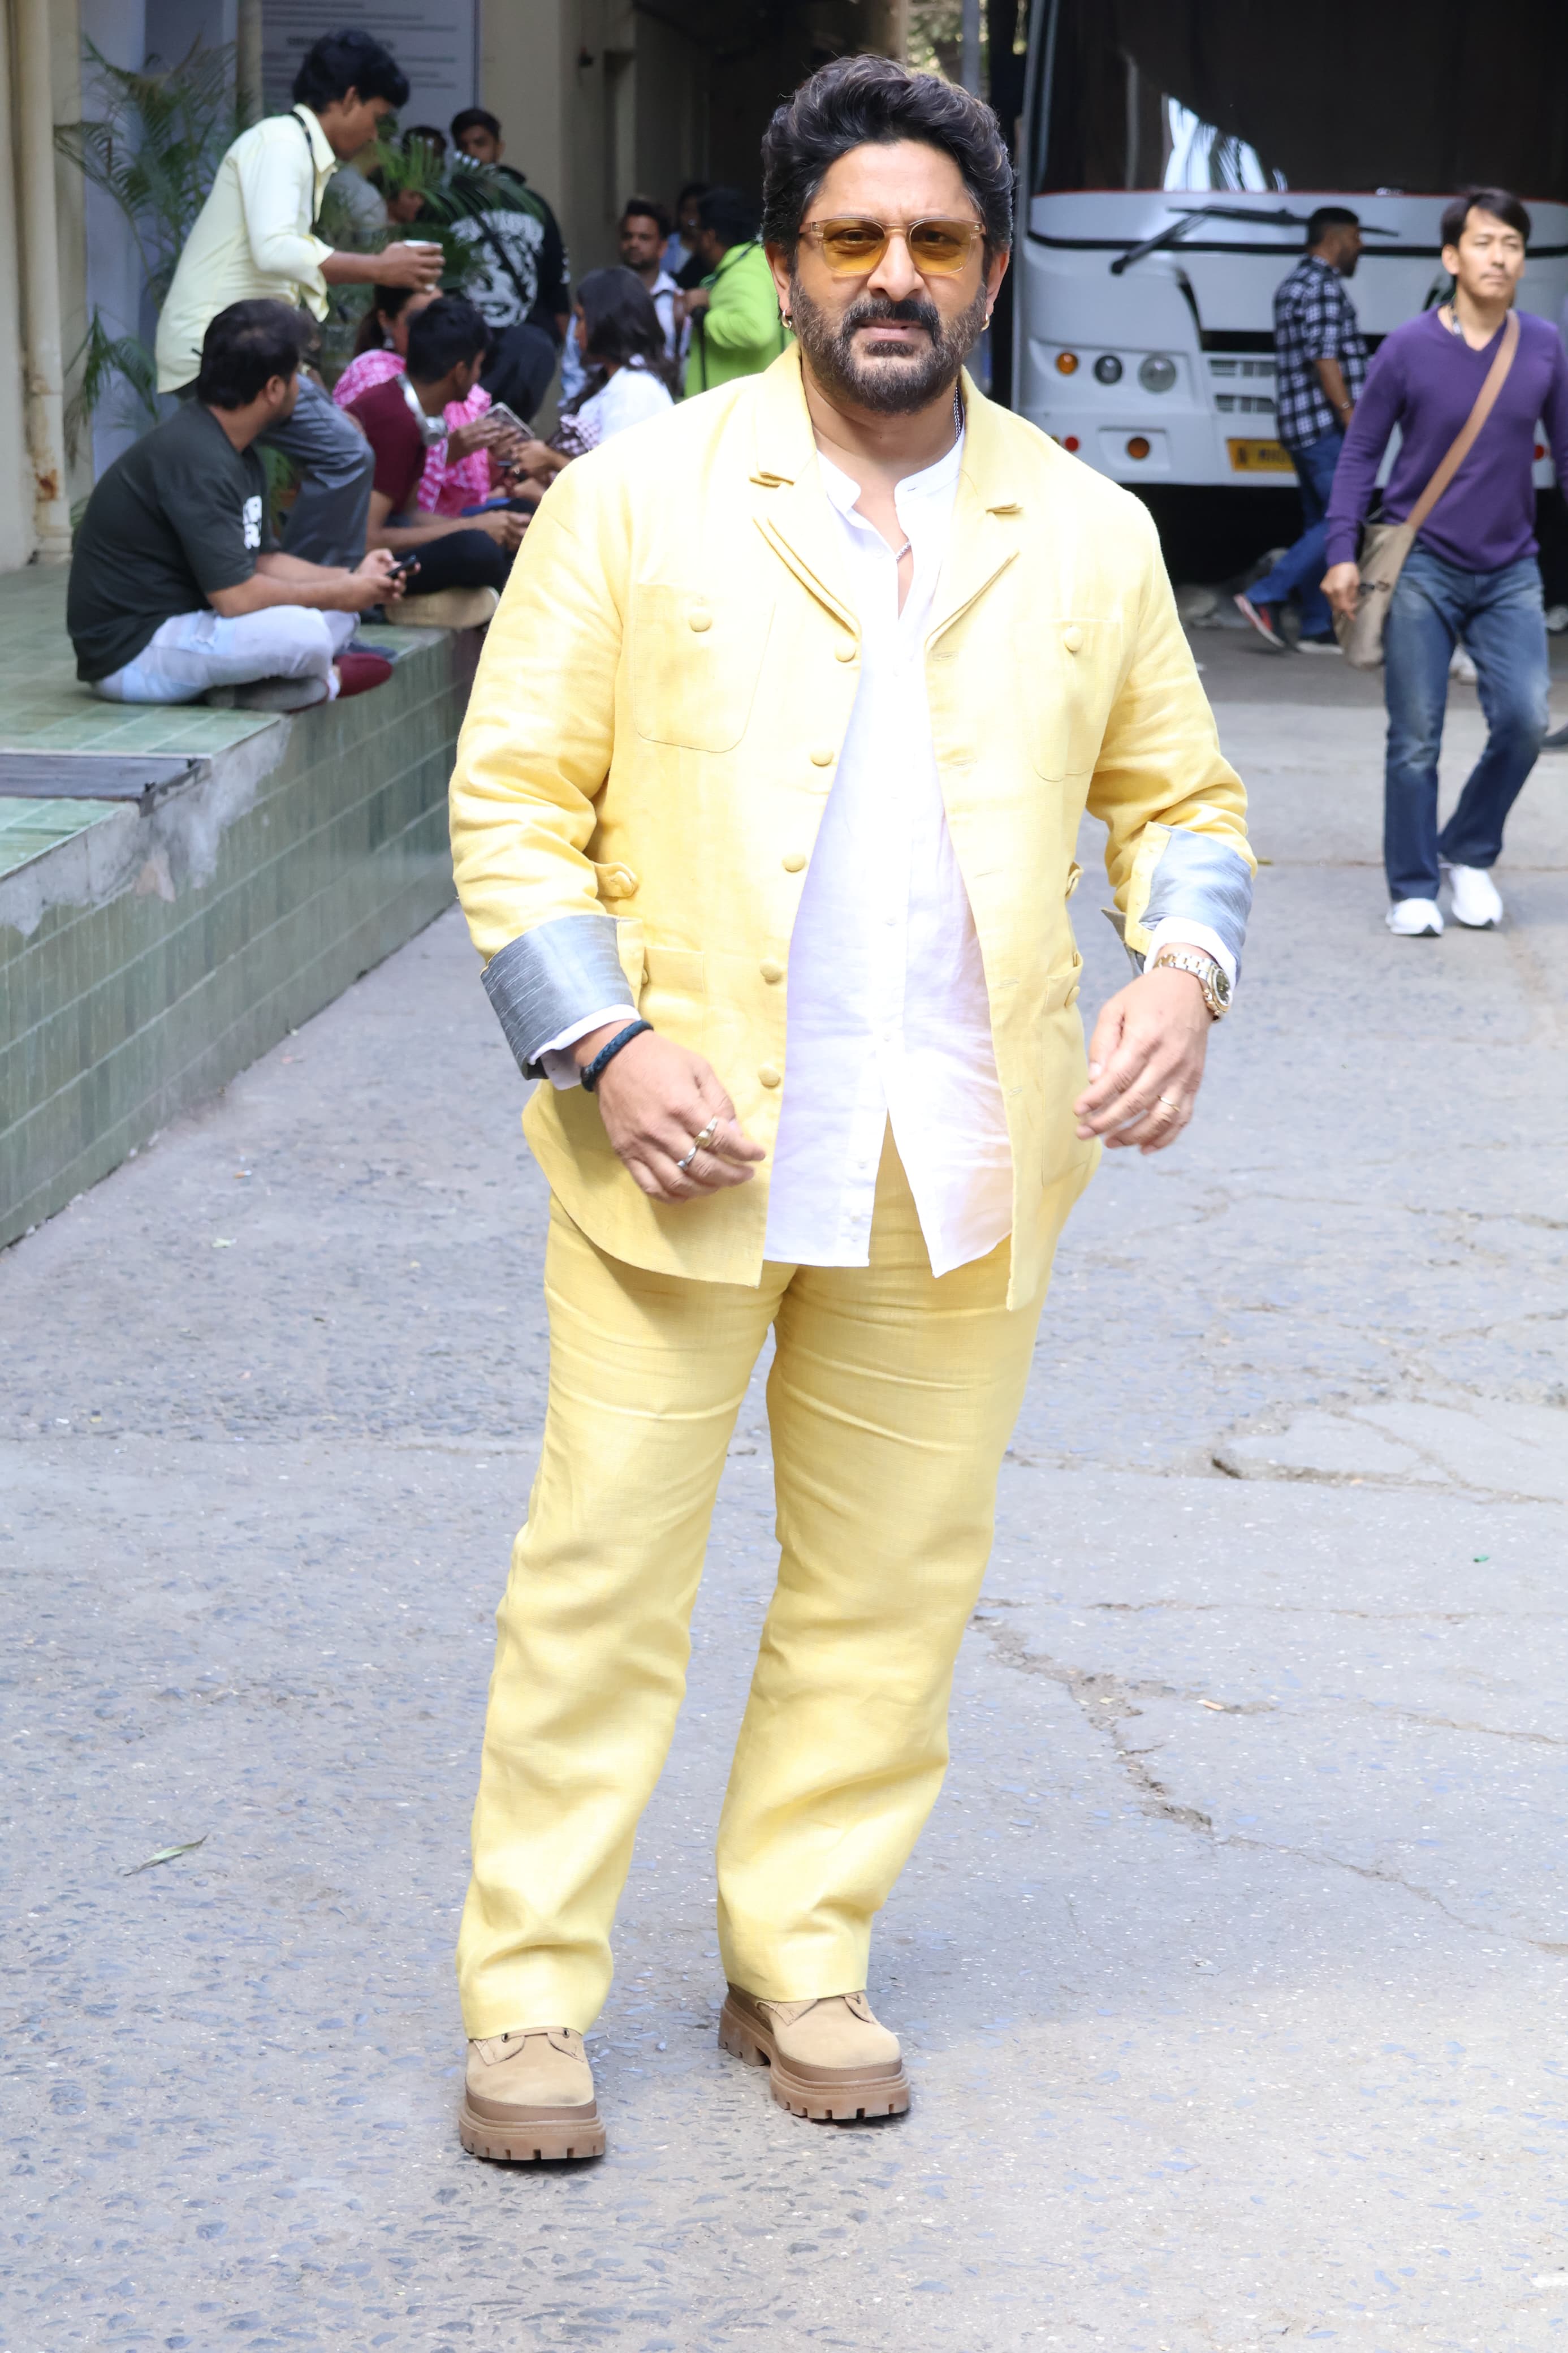 Arshad Warsi looked handsome in his yellow attire. The actor was all smiles for the paparazzi